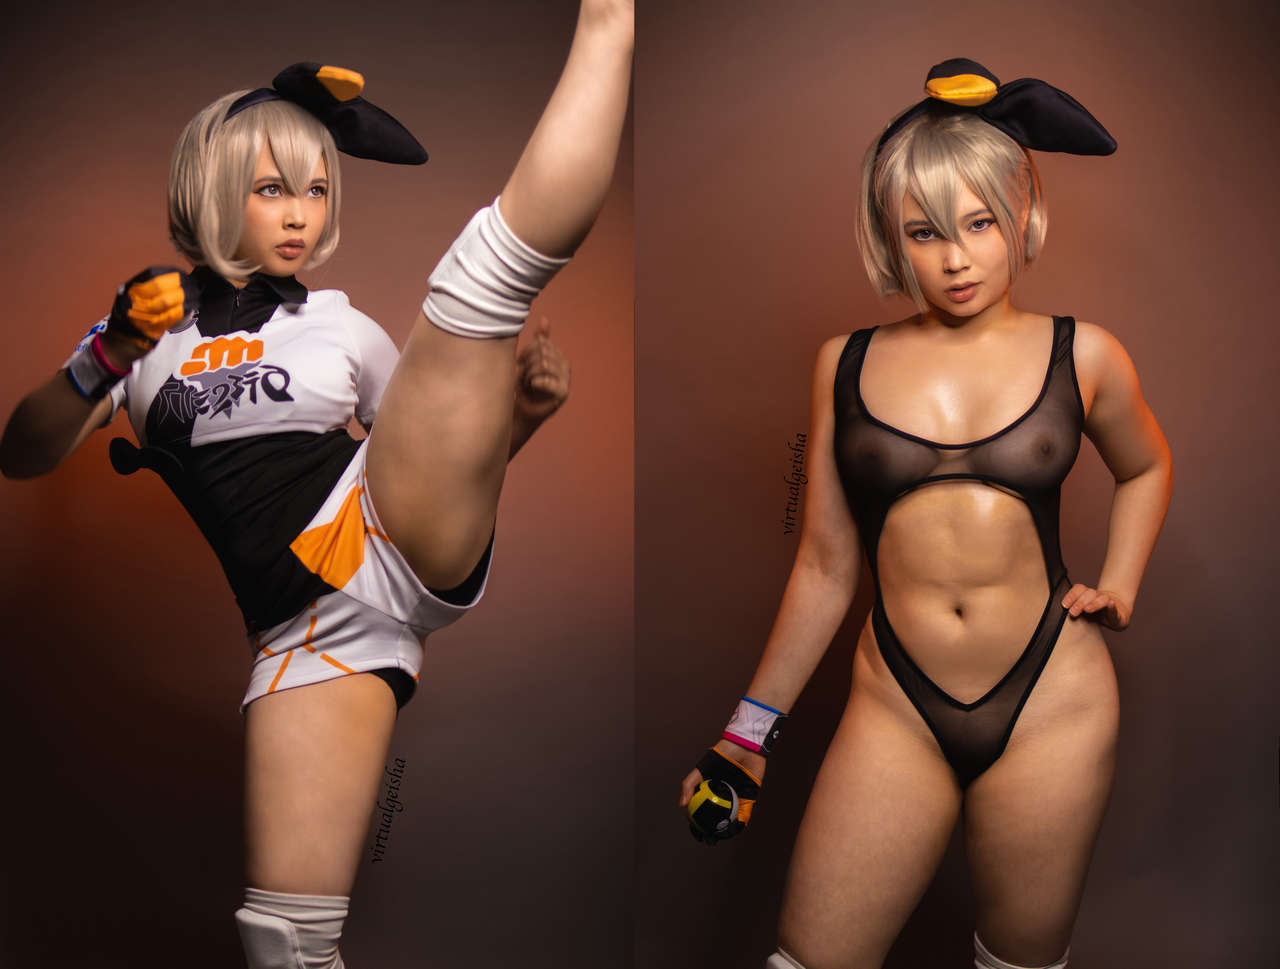 Bea From Pokemon By Virtual Geish